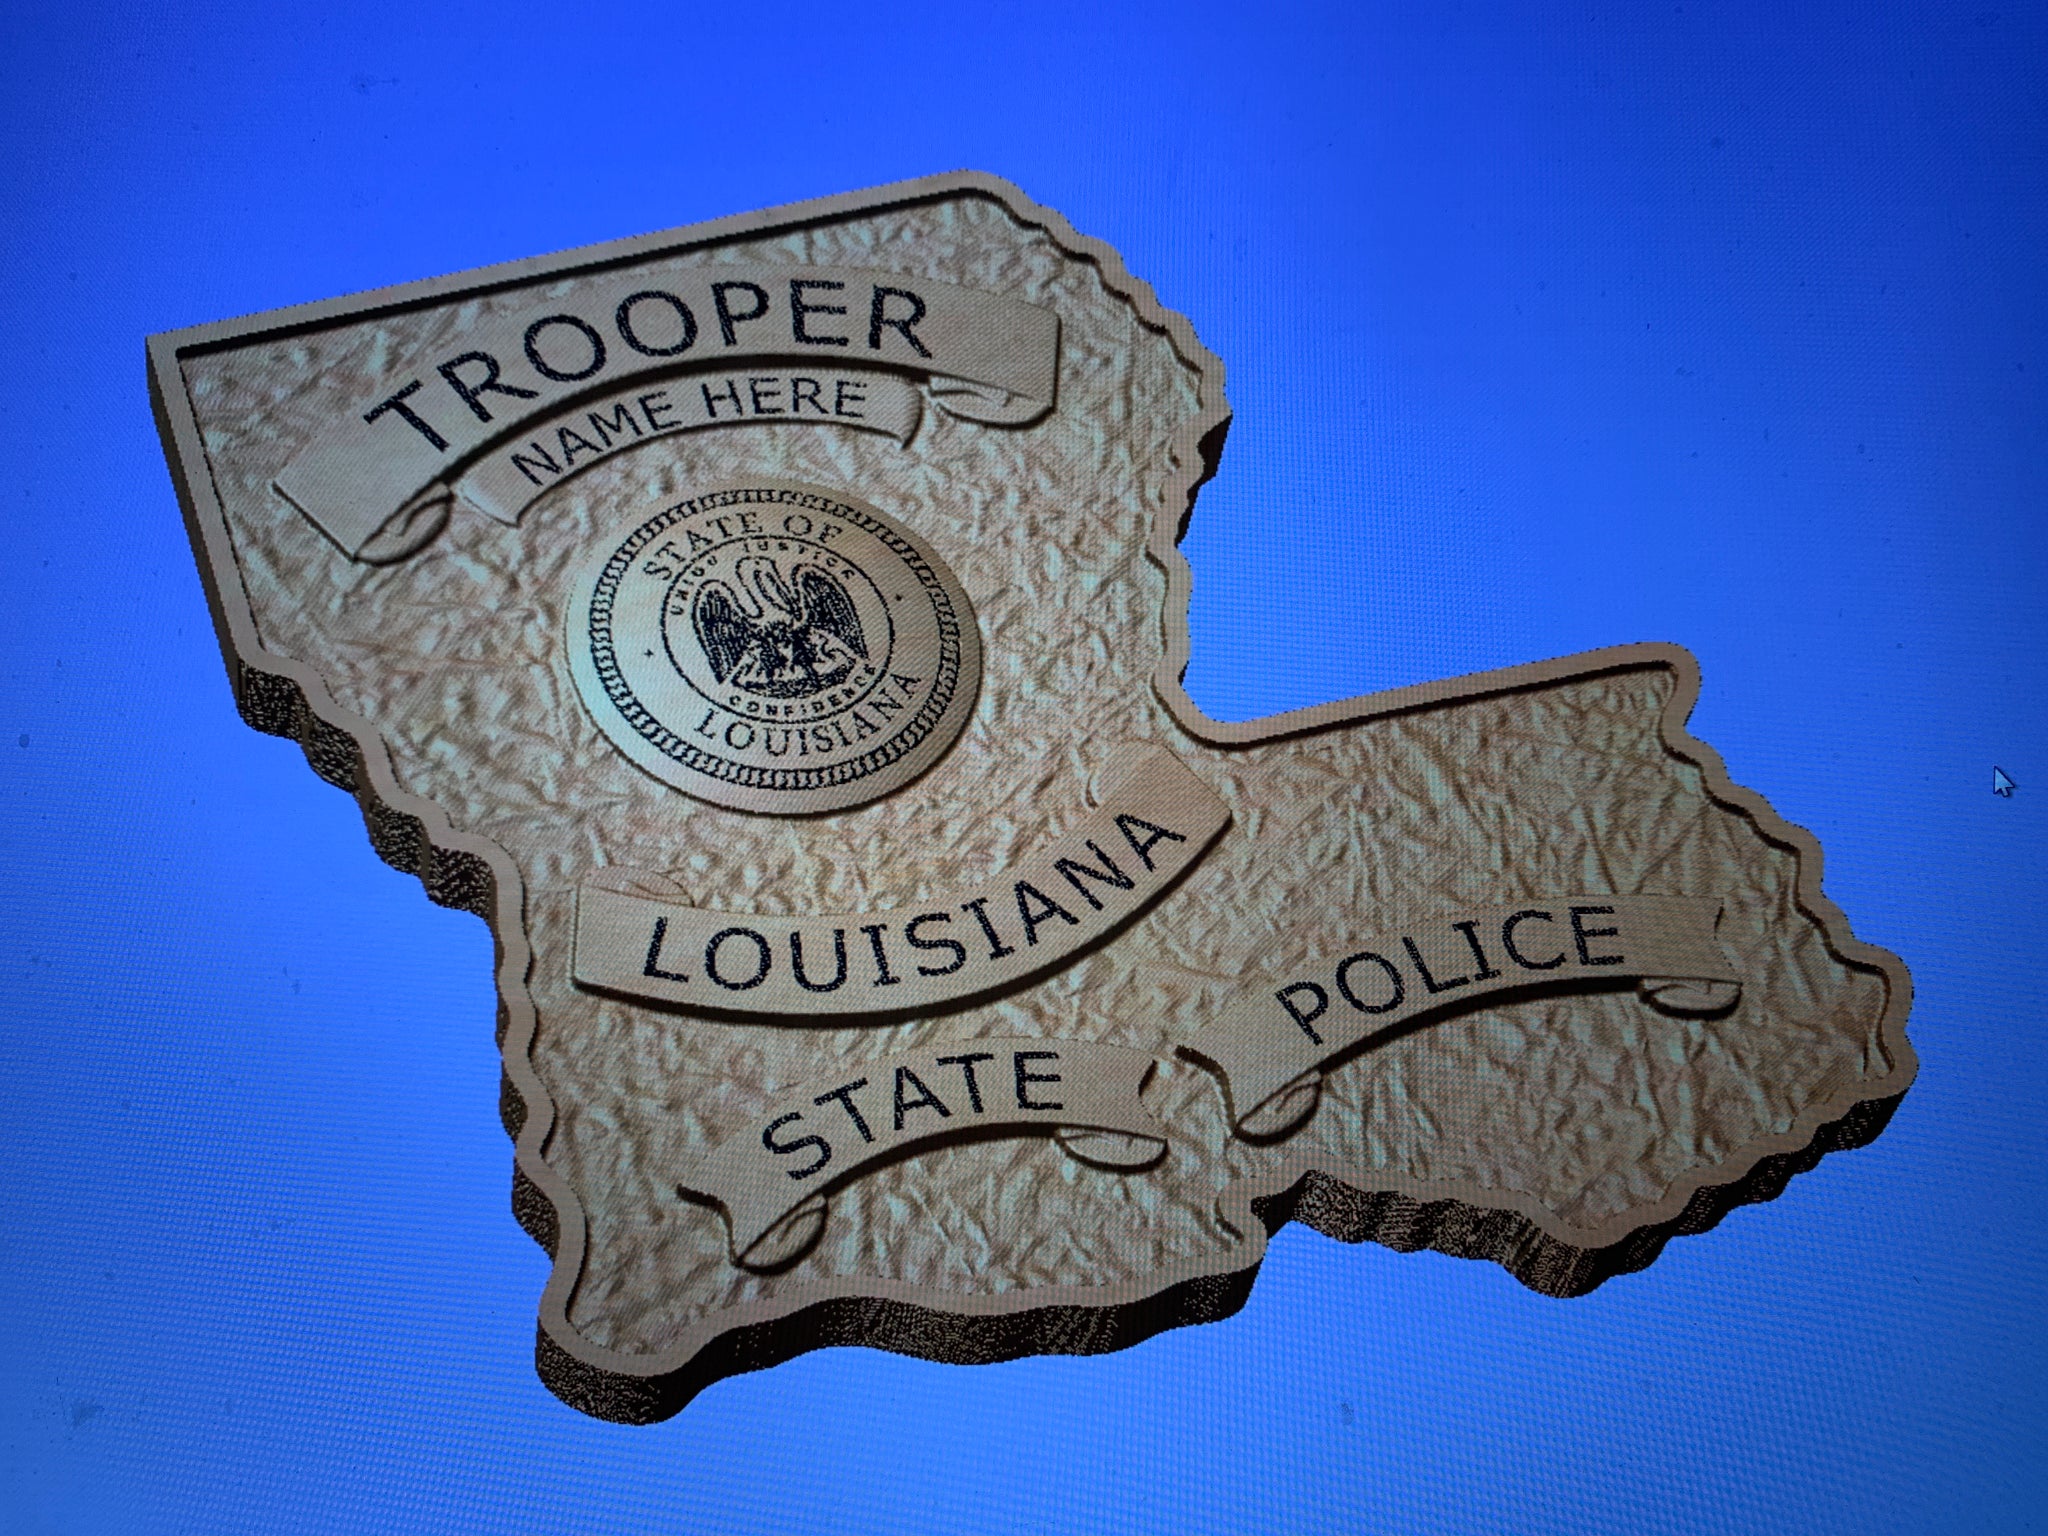 Louisiana Trooper State Police Badge, Pins and Badges